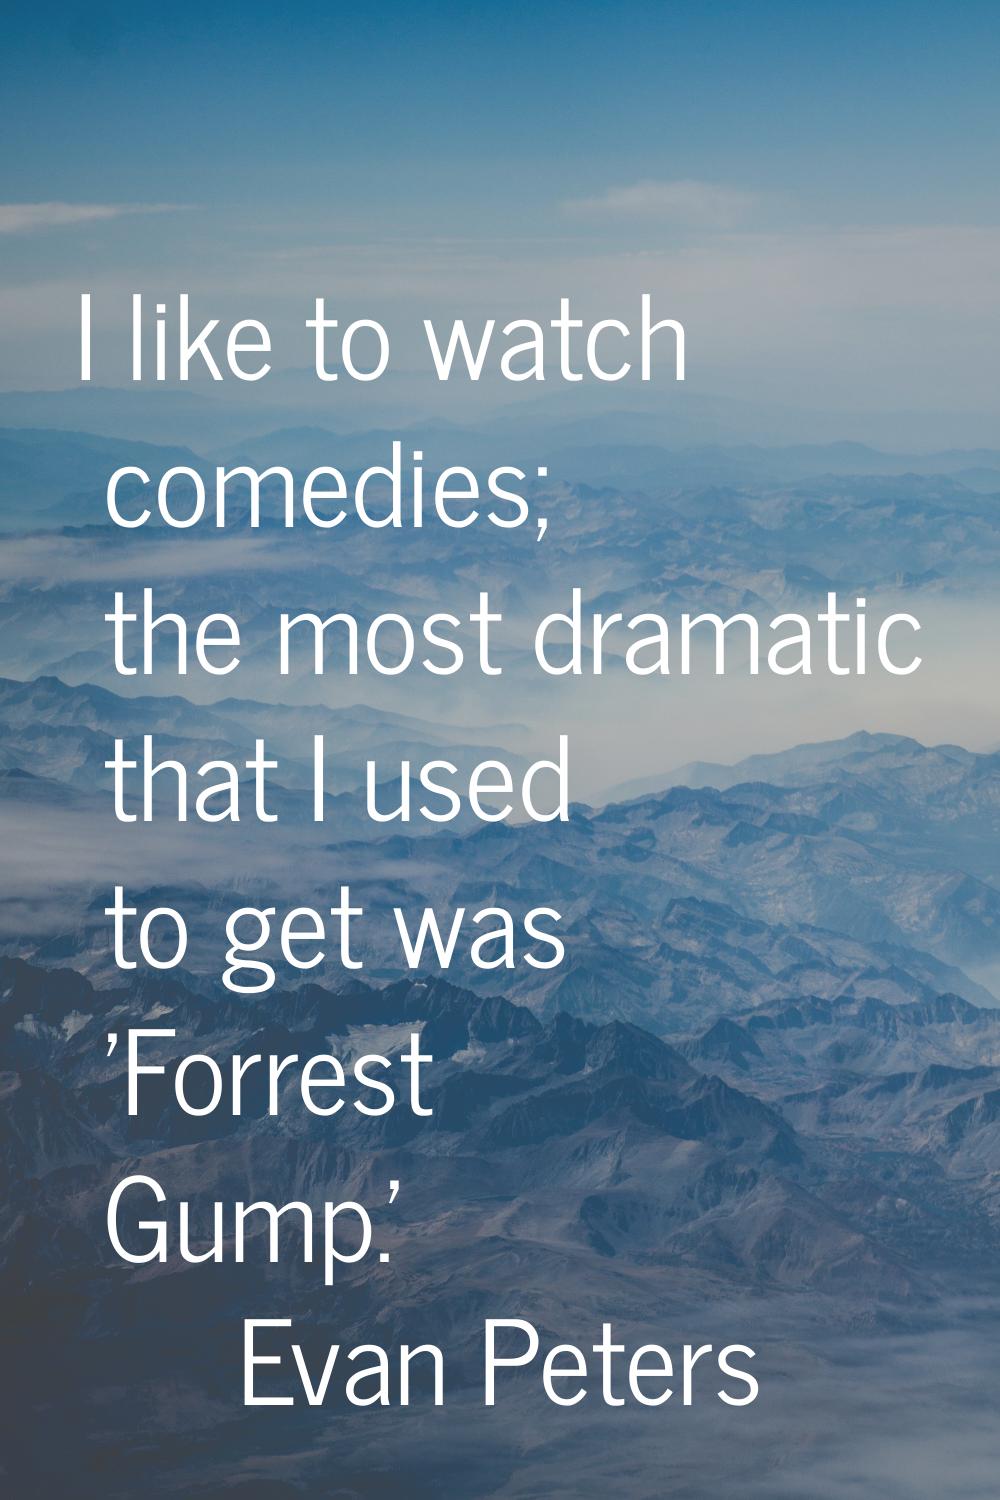 I like to watch comedies; the most dramatic that I used to get was 'Forrest Gump.'